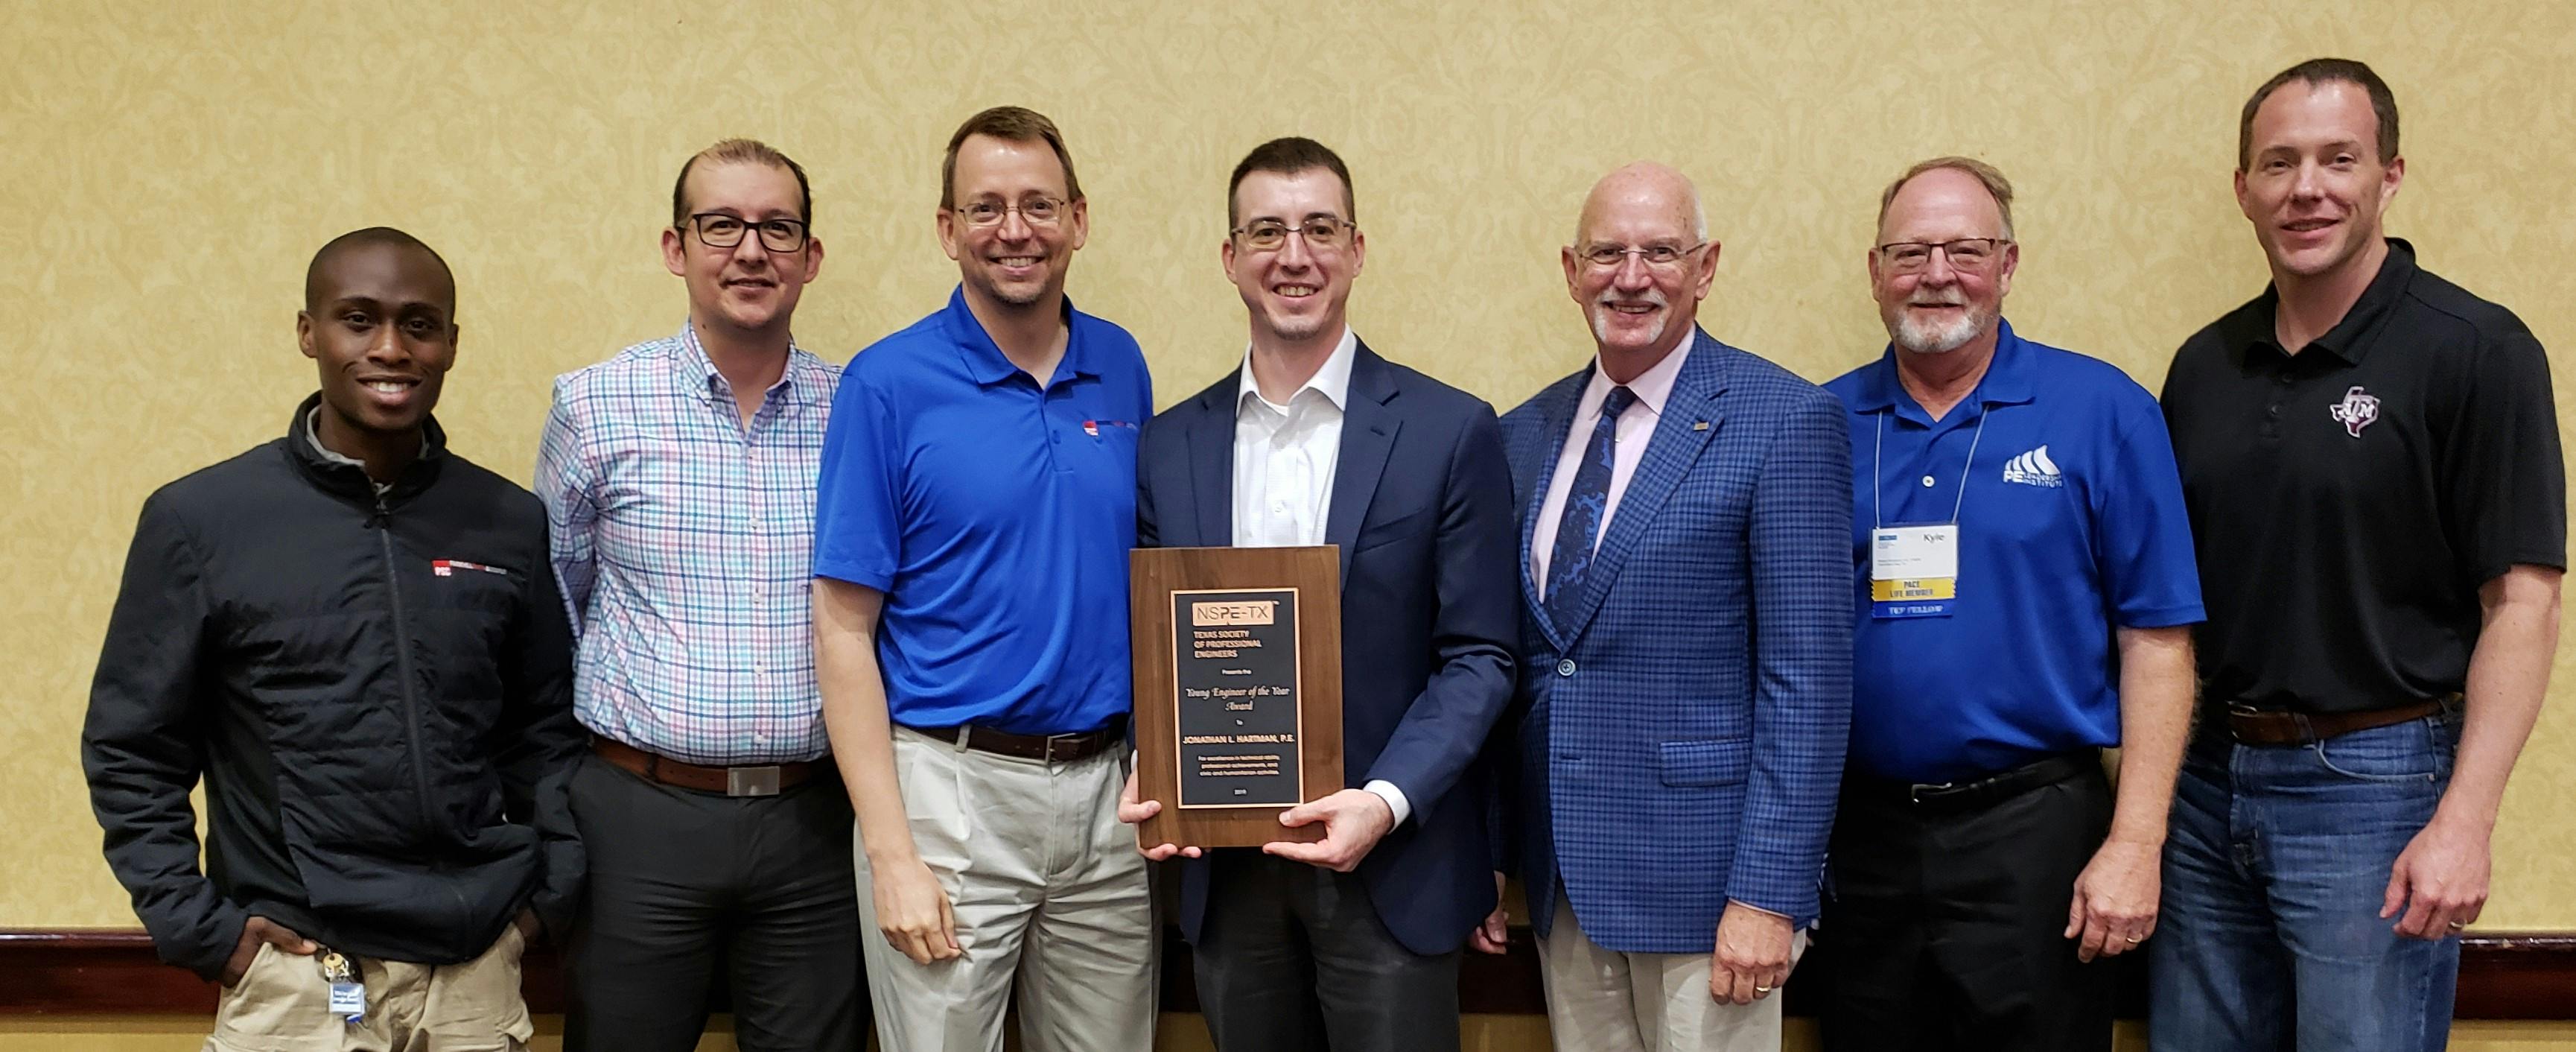 Hartman Named Texas Society of Professional Engineers Young Engineer of the Year